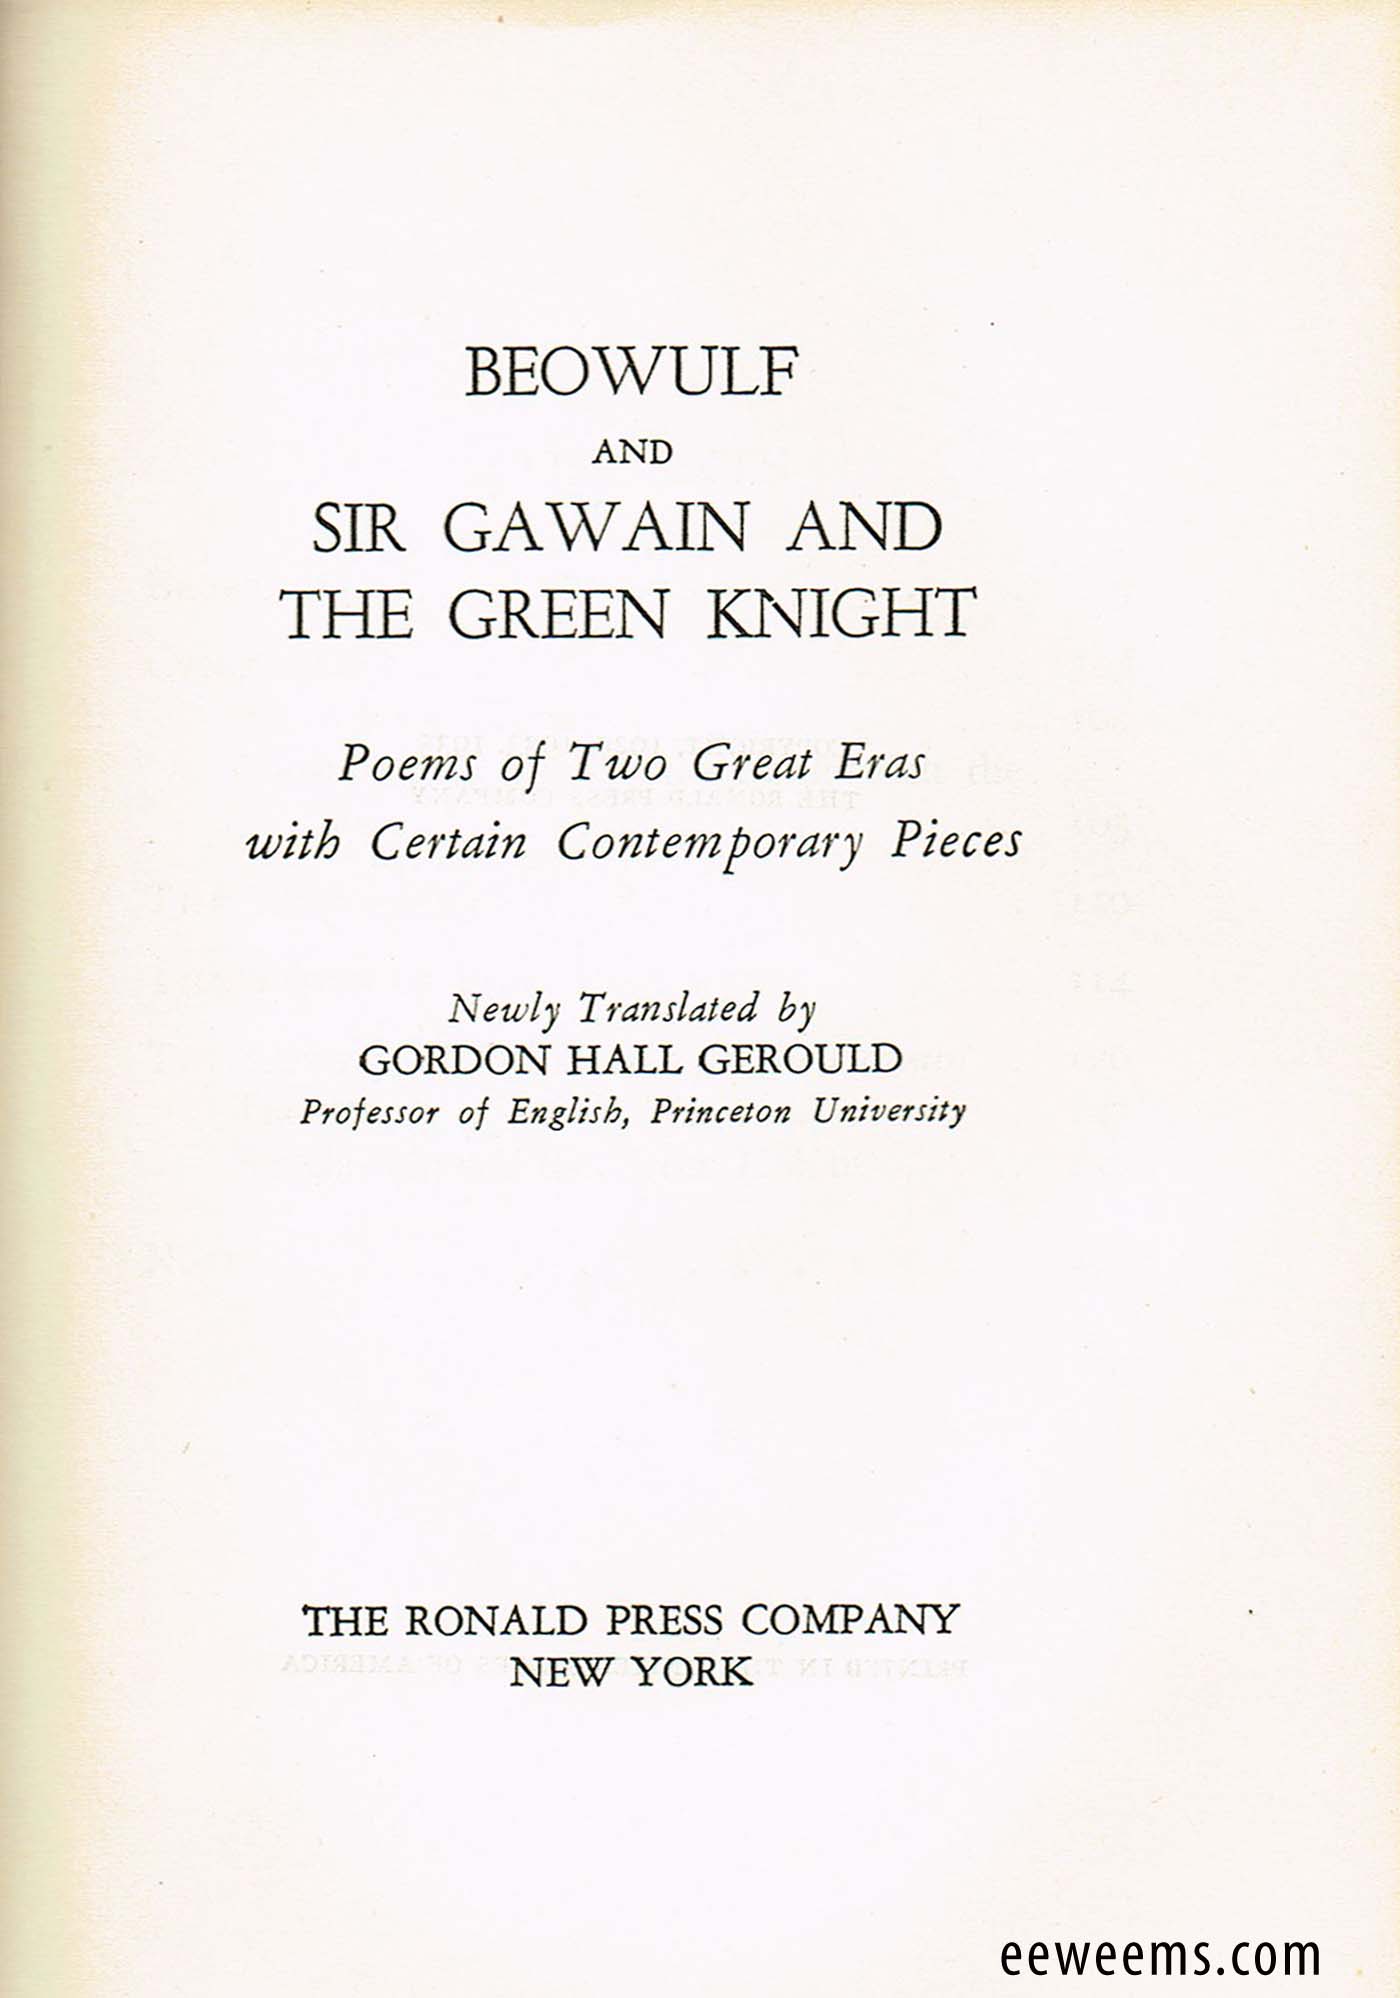 Compare and contrast essay between beowulf and king arthur